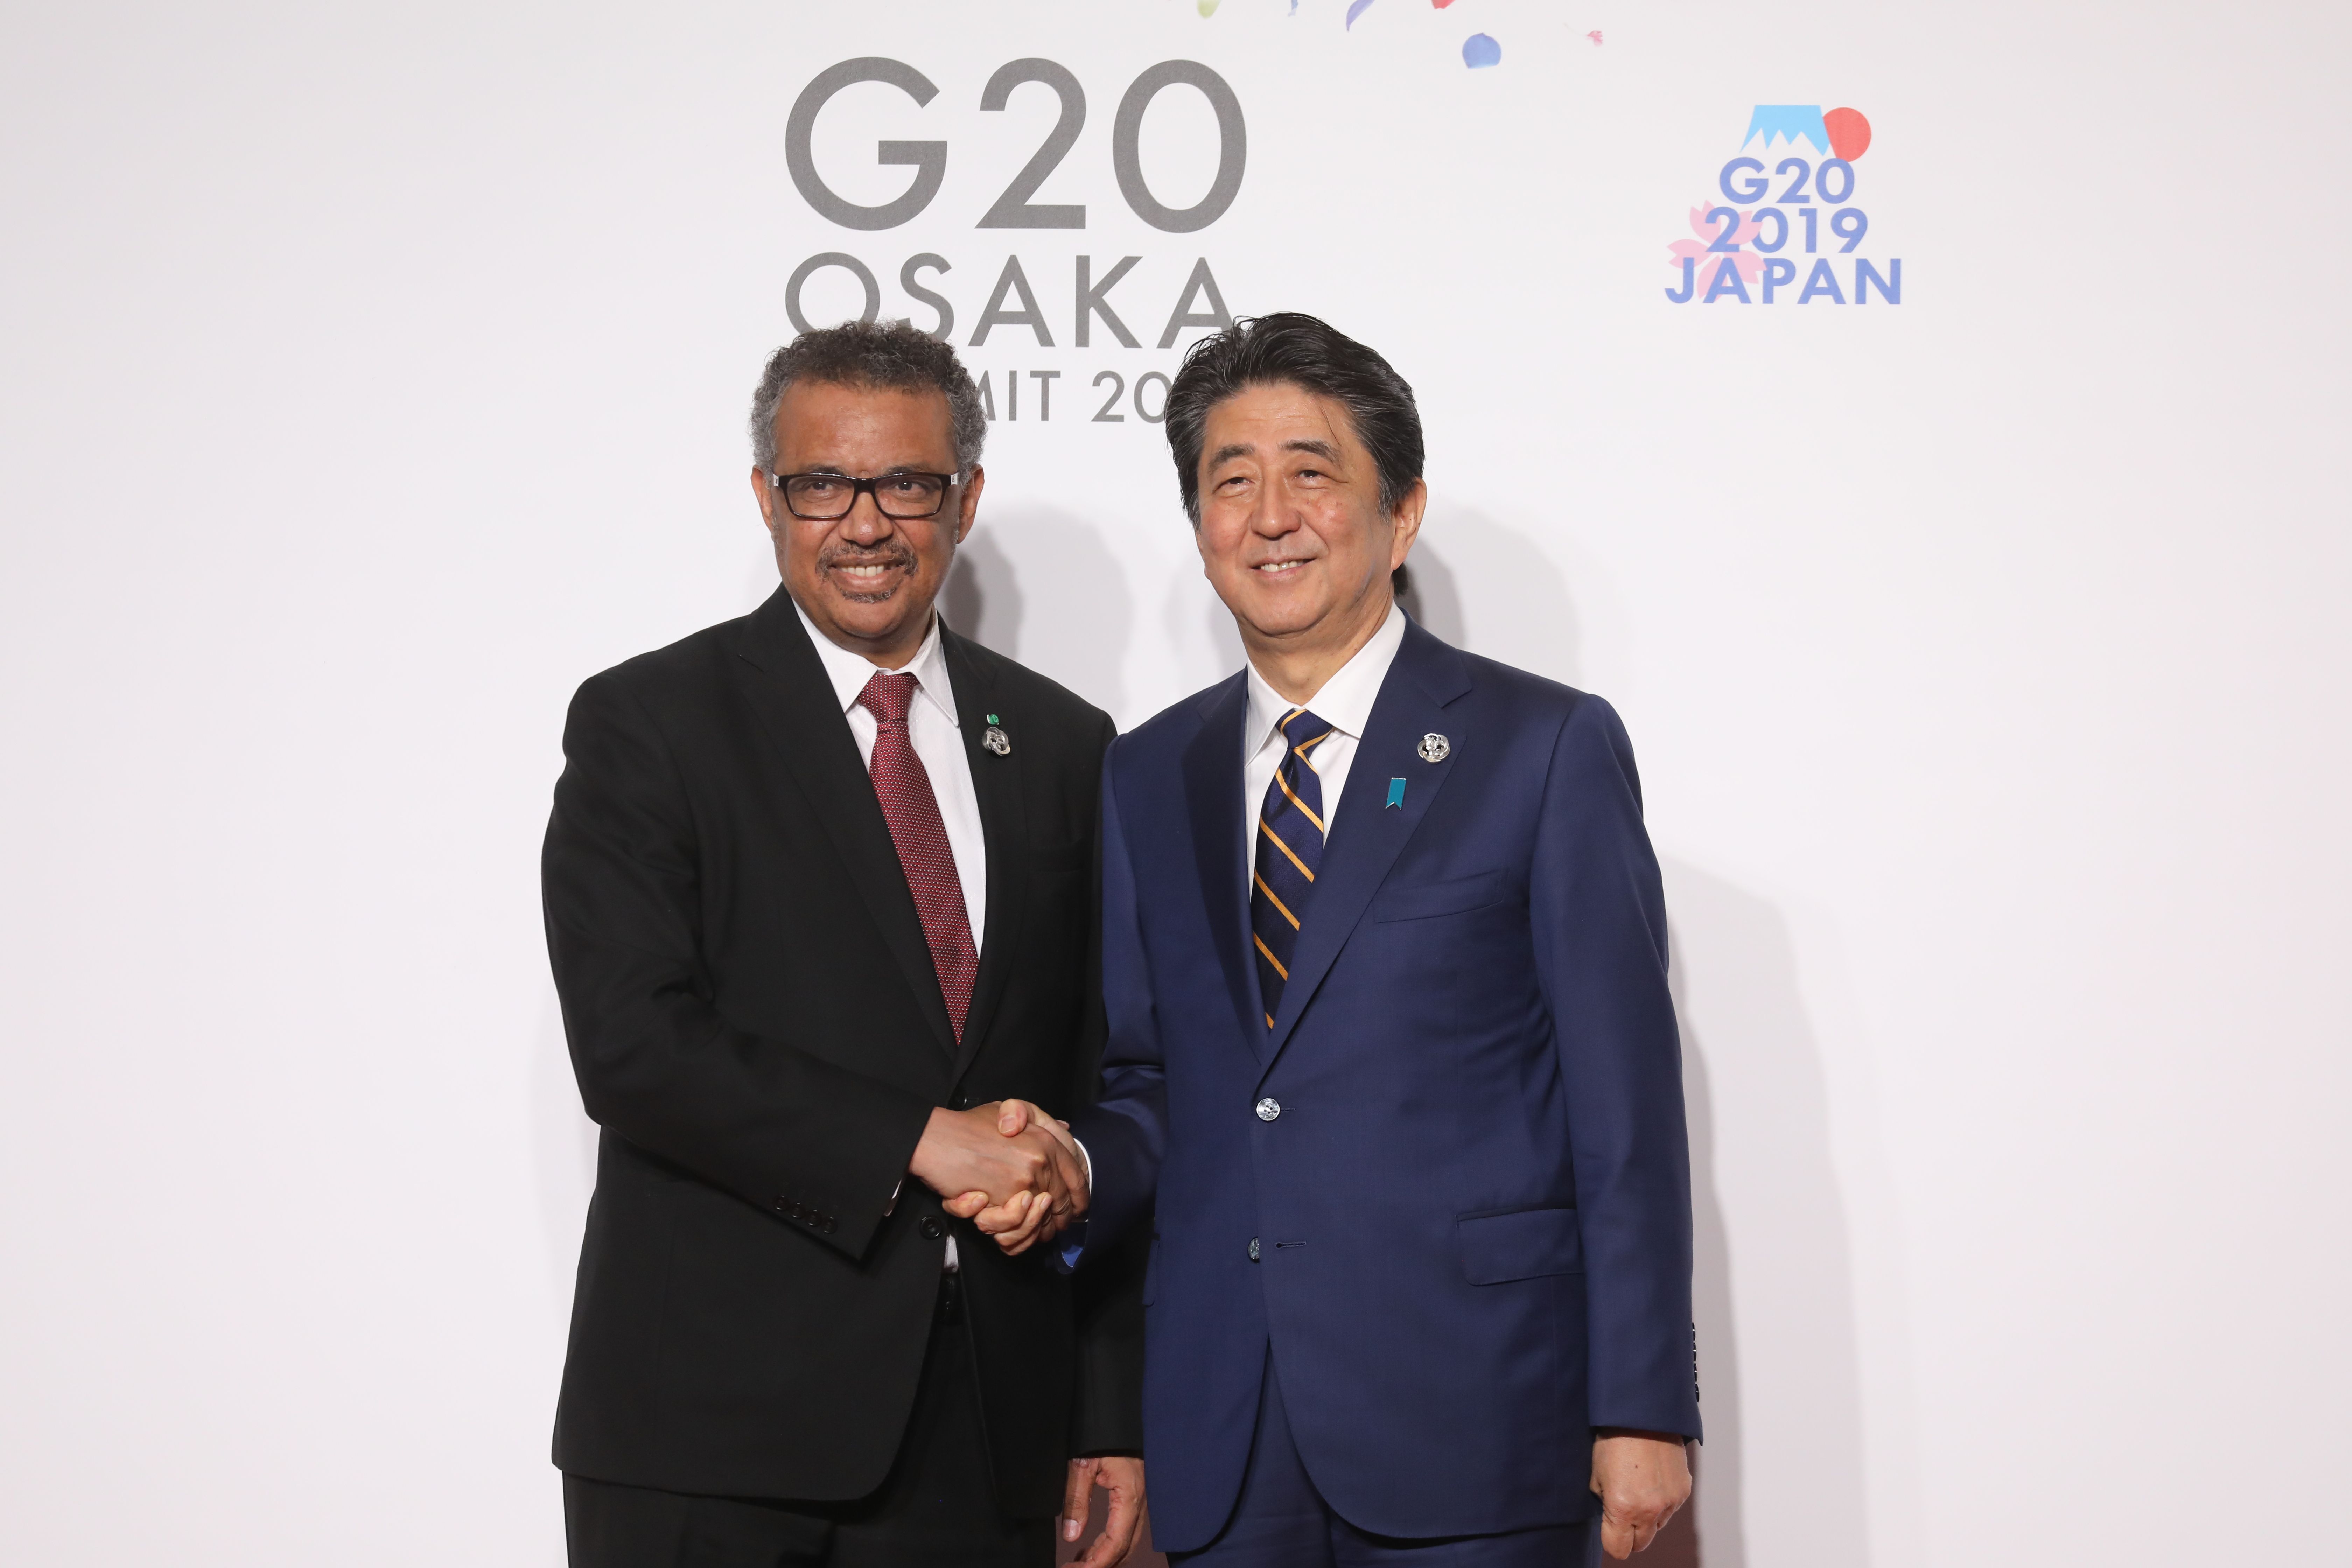 World Health Organization director general Tedros Adhanom is welcomed by Japanese Prime Minister Shinzo Abe prior to the family photo at the G20 Osaka Summit in Osaka on June 28, 2019.